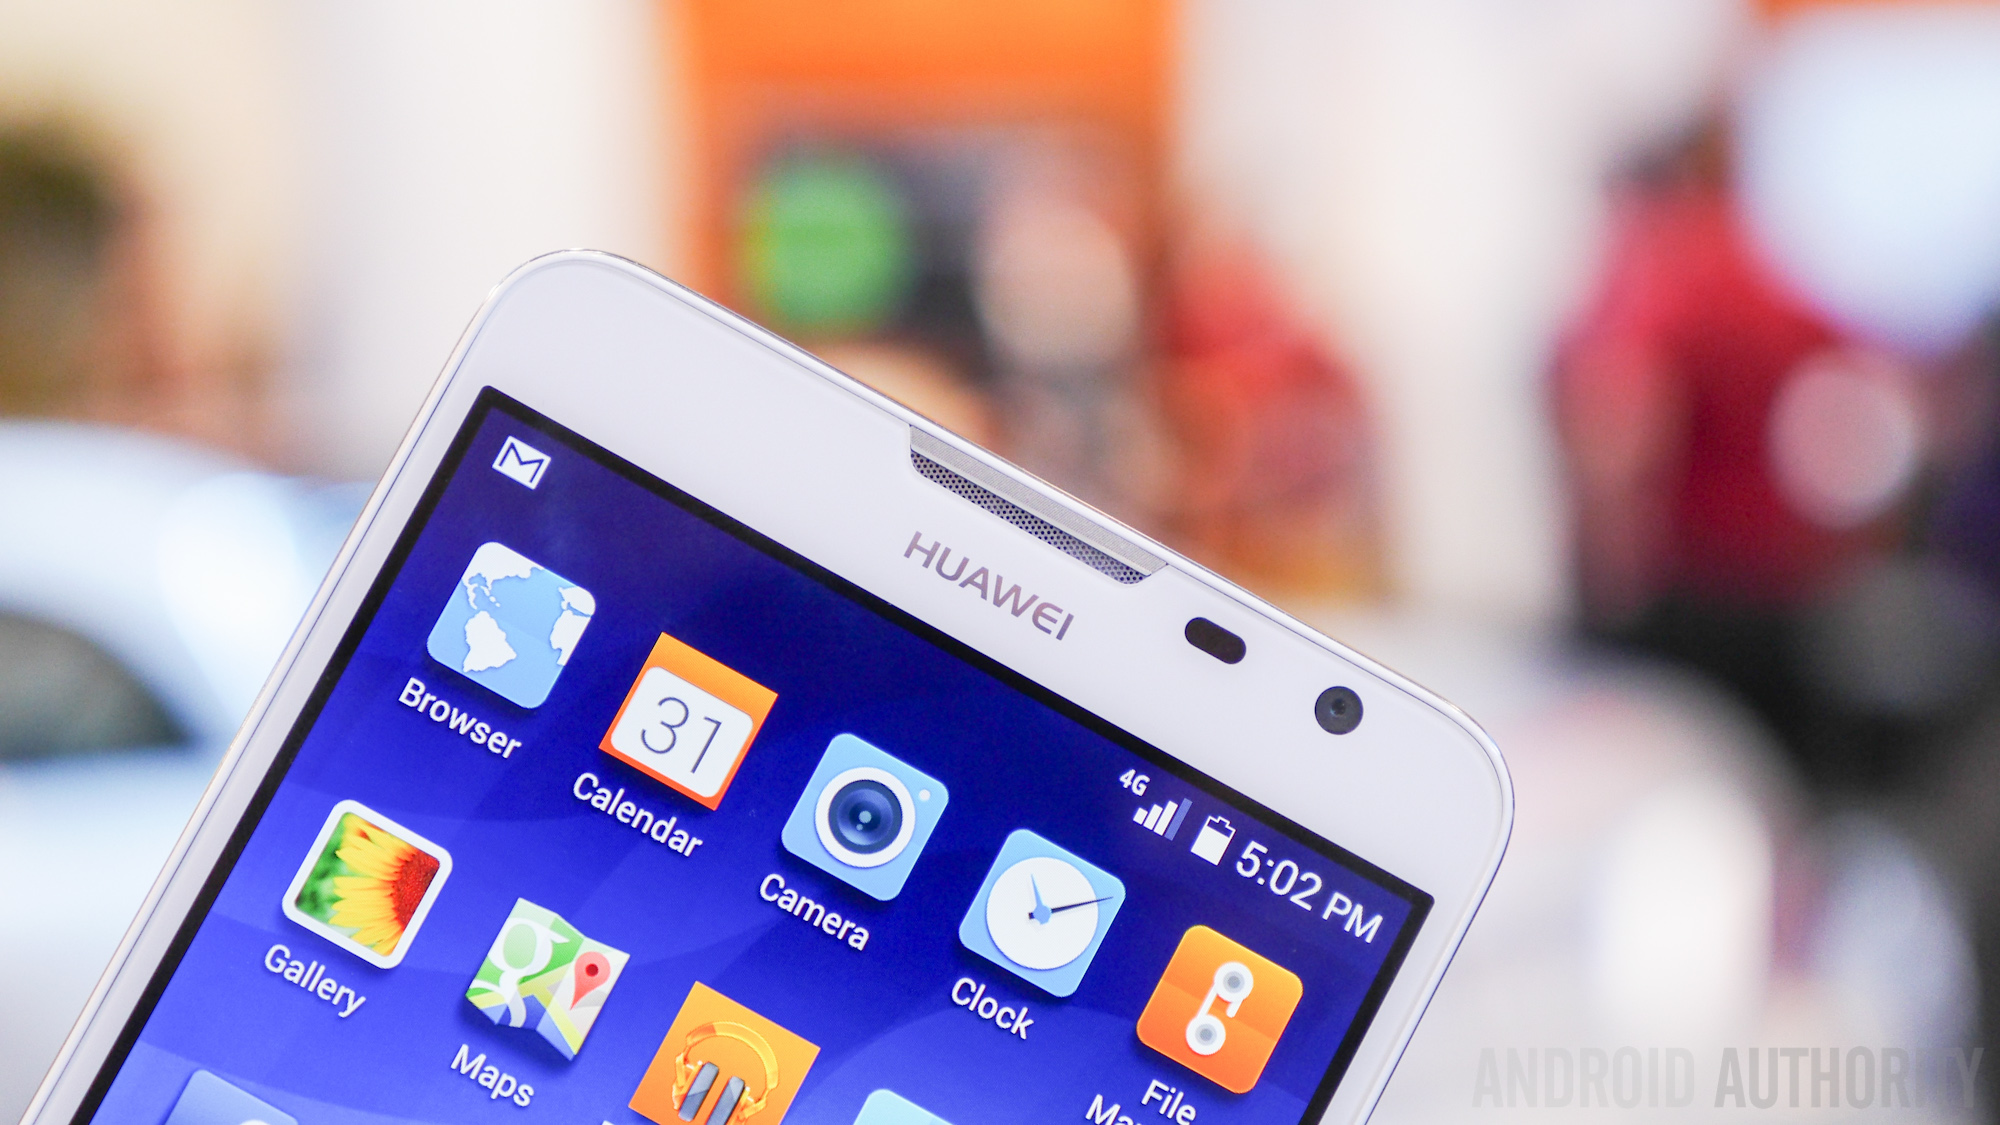 Huawei Ascend Mate 2 Phablet Hands on AA -5